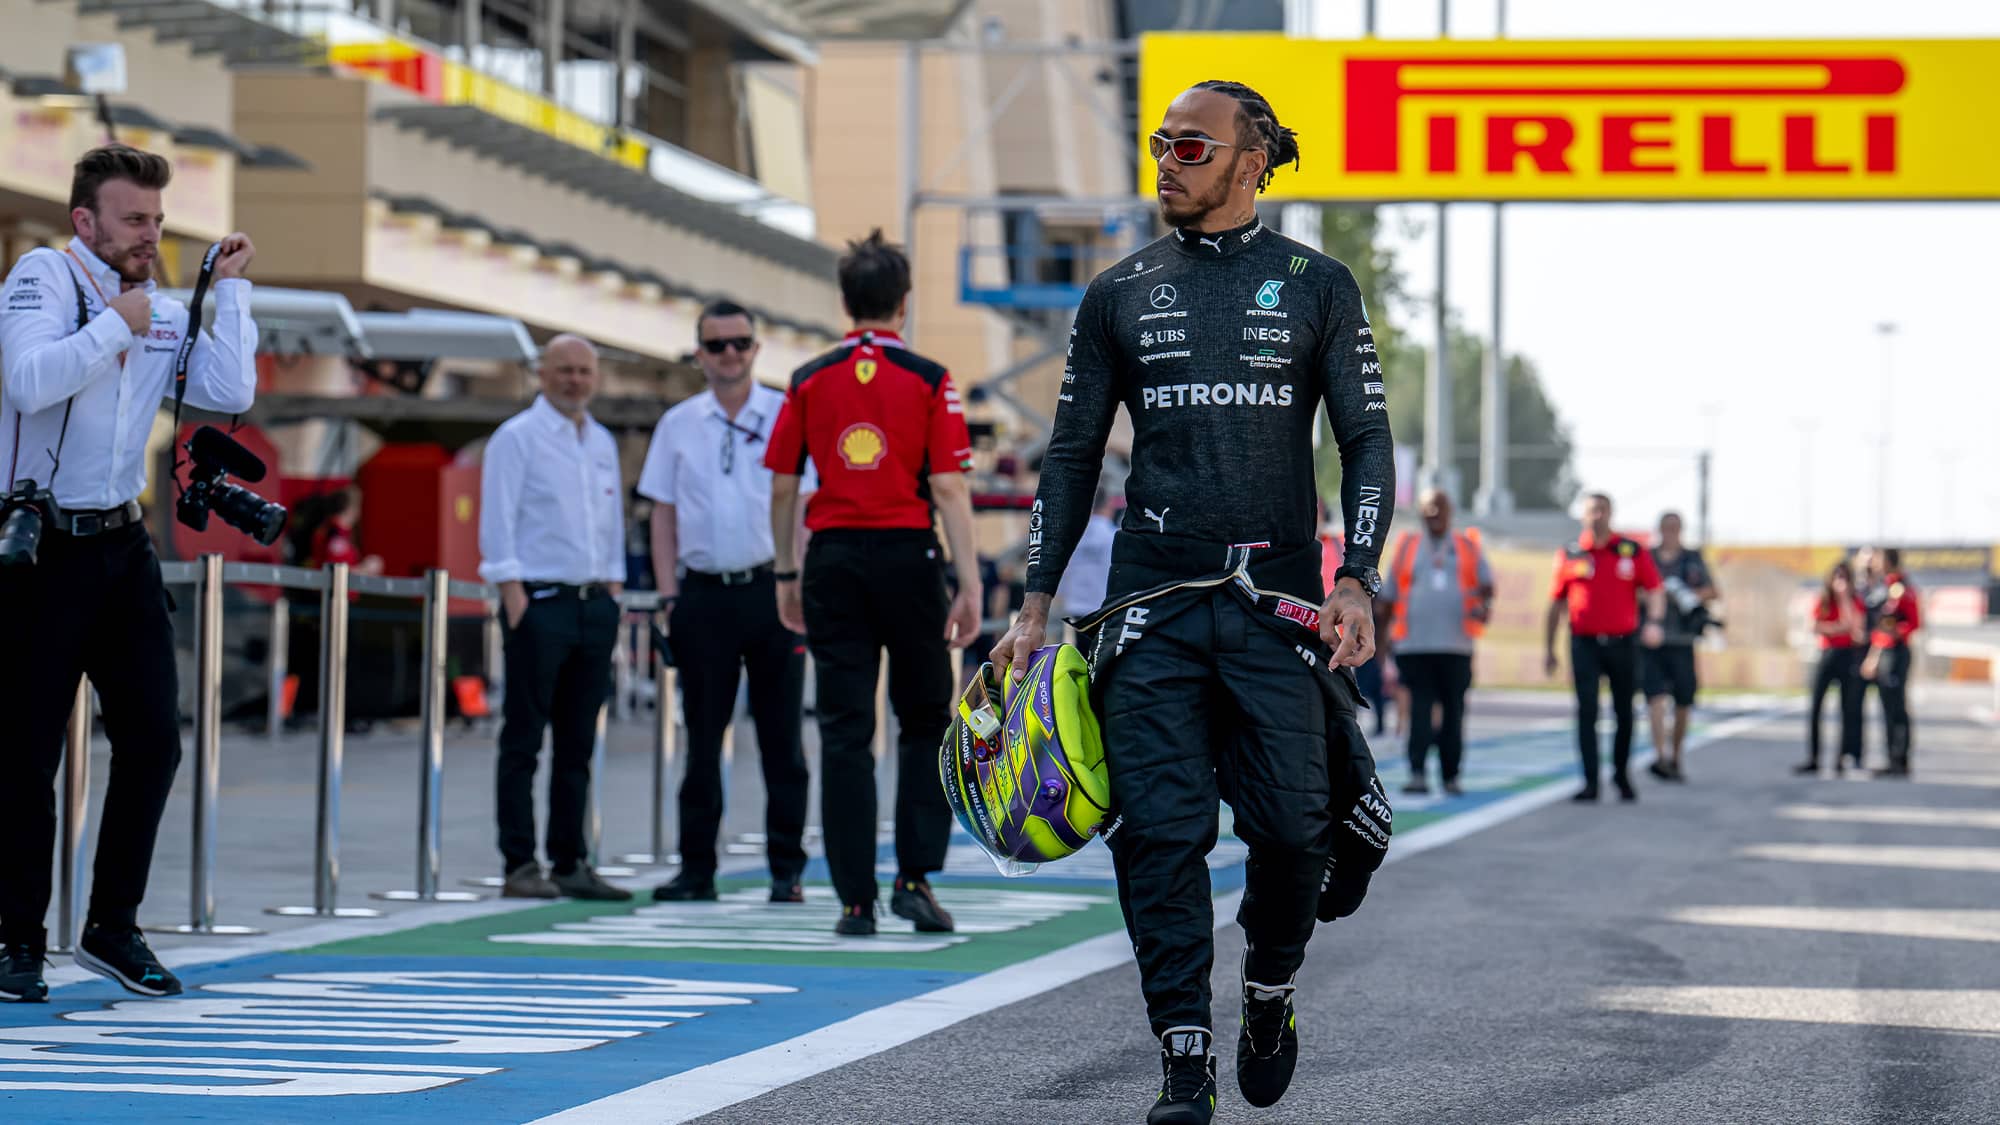 From serving drinks to washing cars: Lewis Hamilton on what helped make him  a sporting great